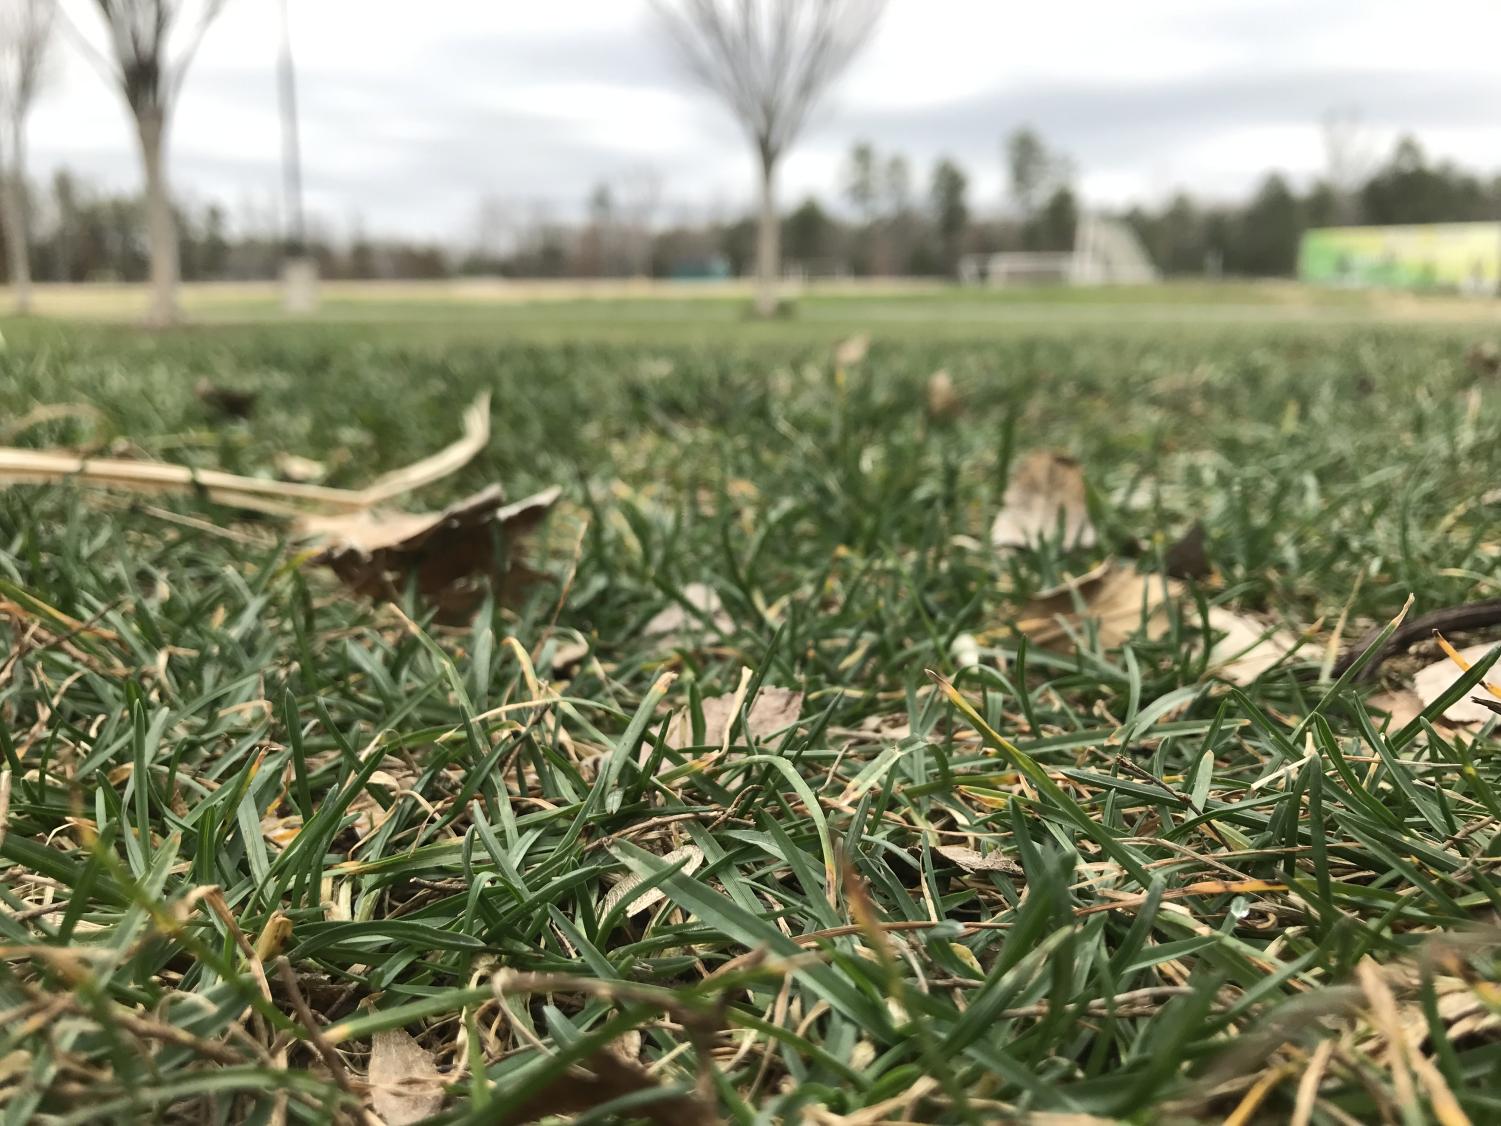 Turf grass on the campus of Clover Hill High School.